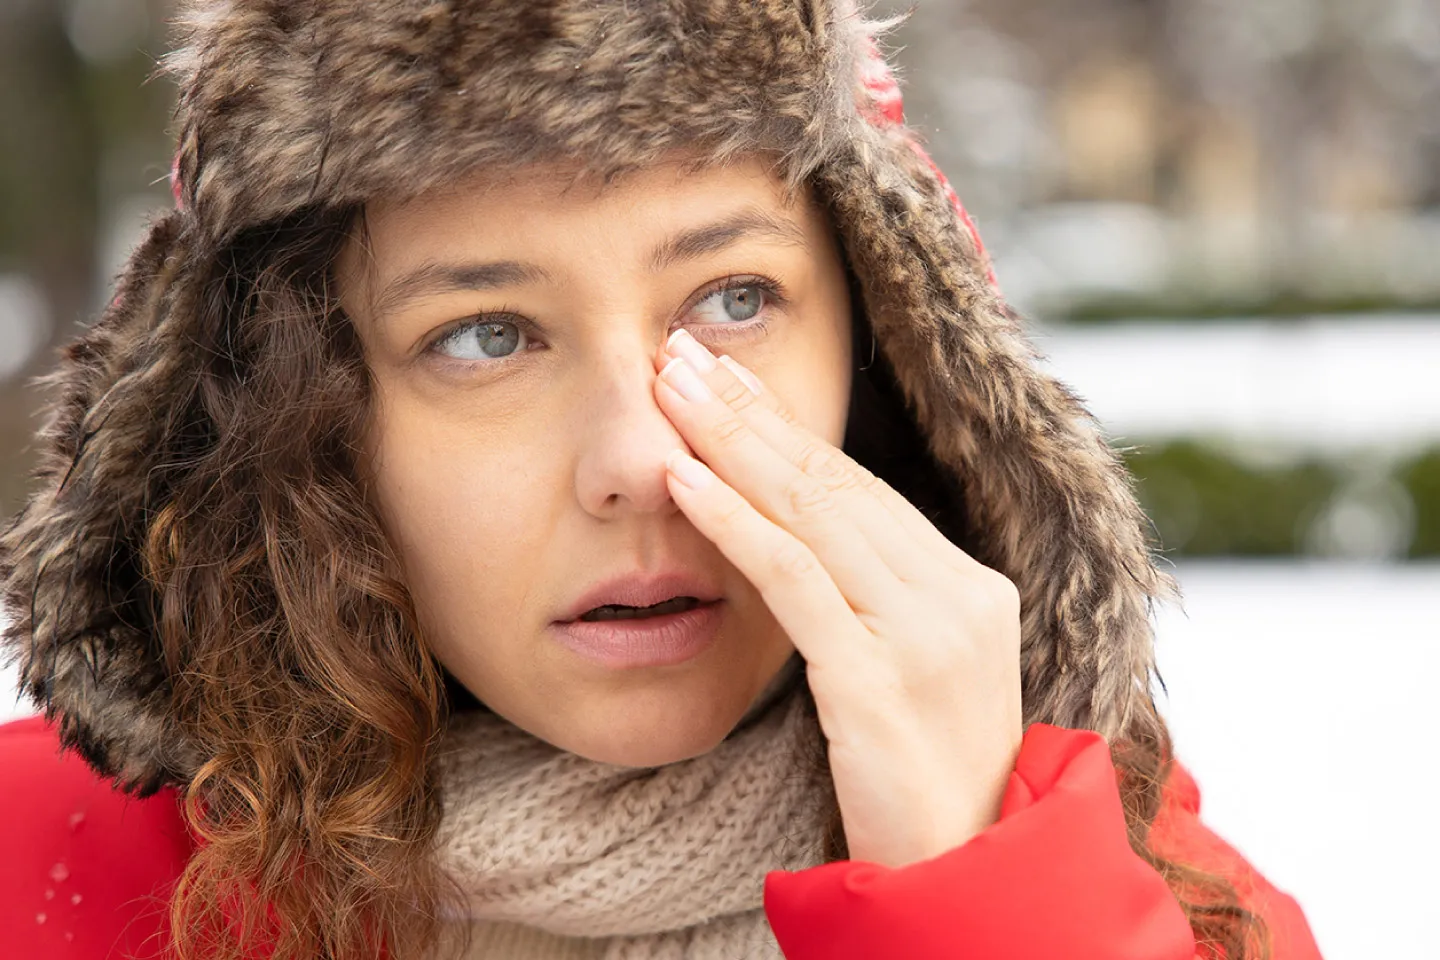 Winter itch is dermatitis that can affect you most during cold weather